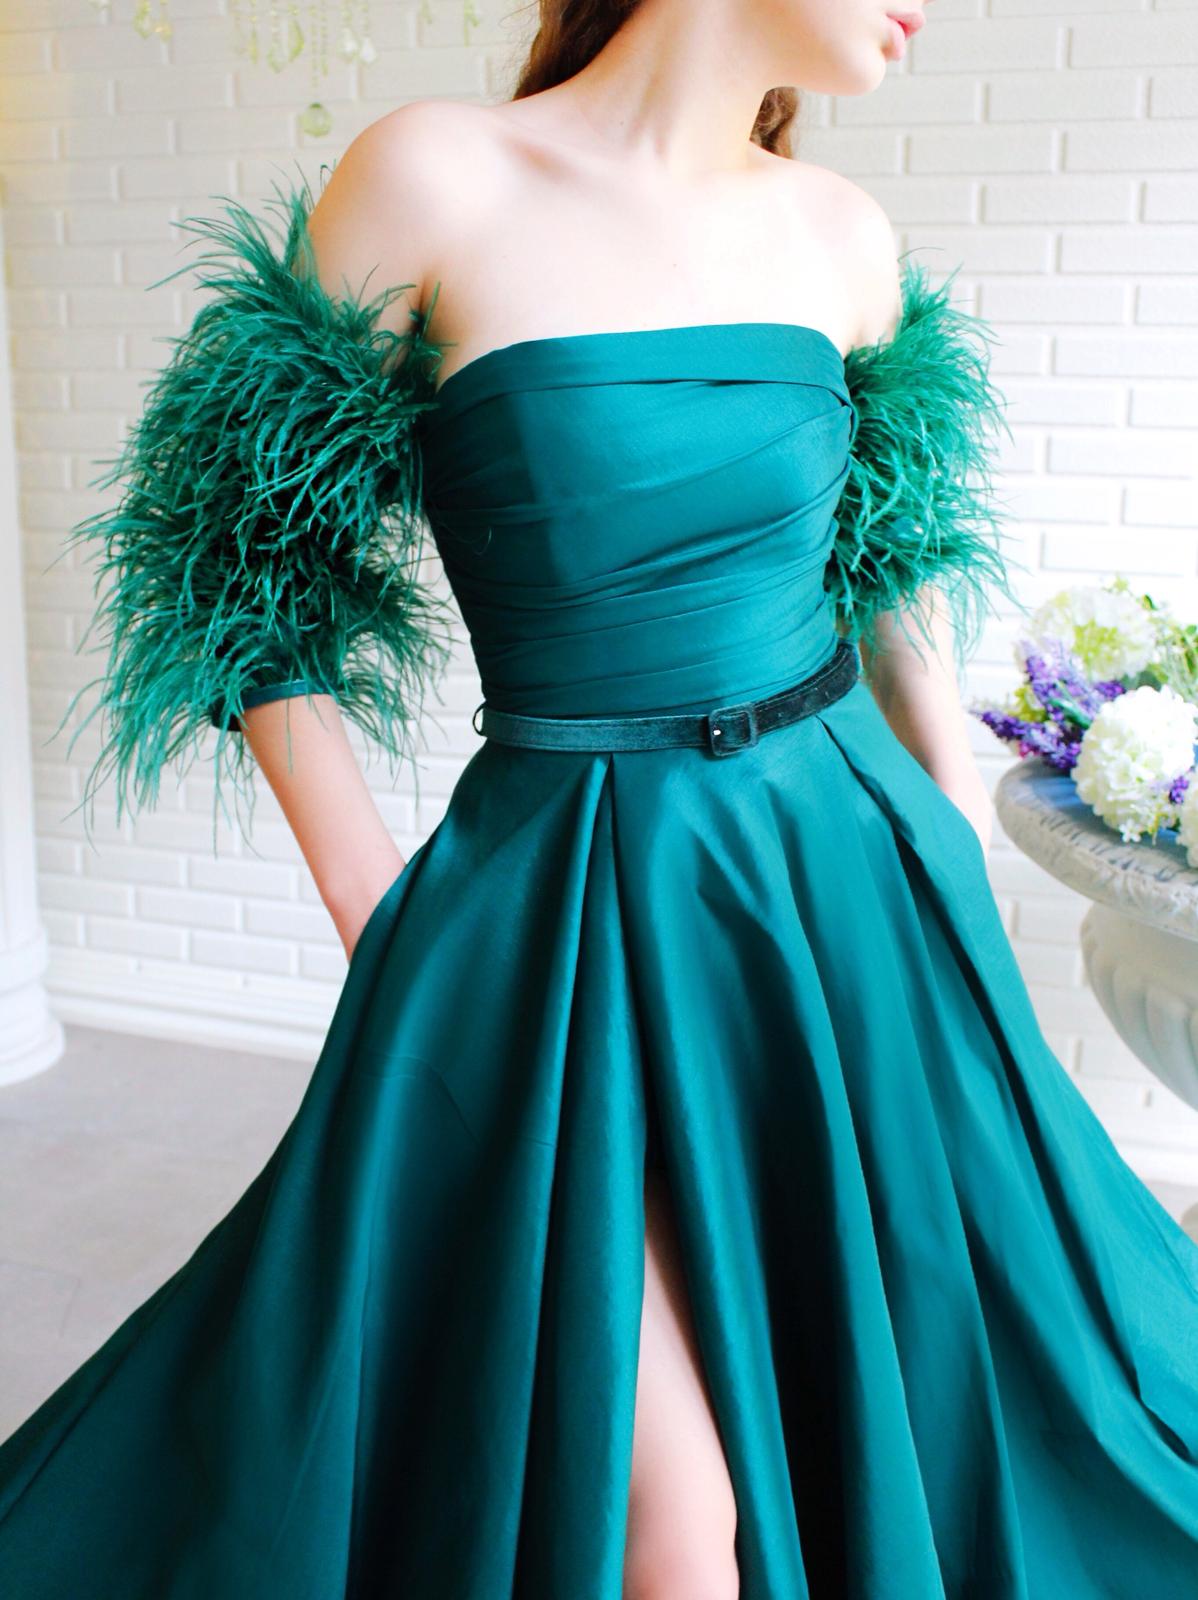 Green A-Line dress with belt, off the shoulder sleeves and feathers